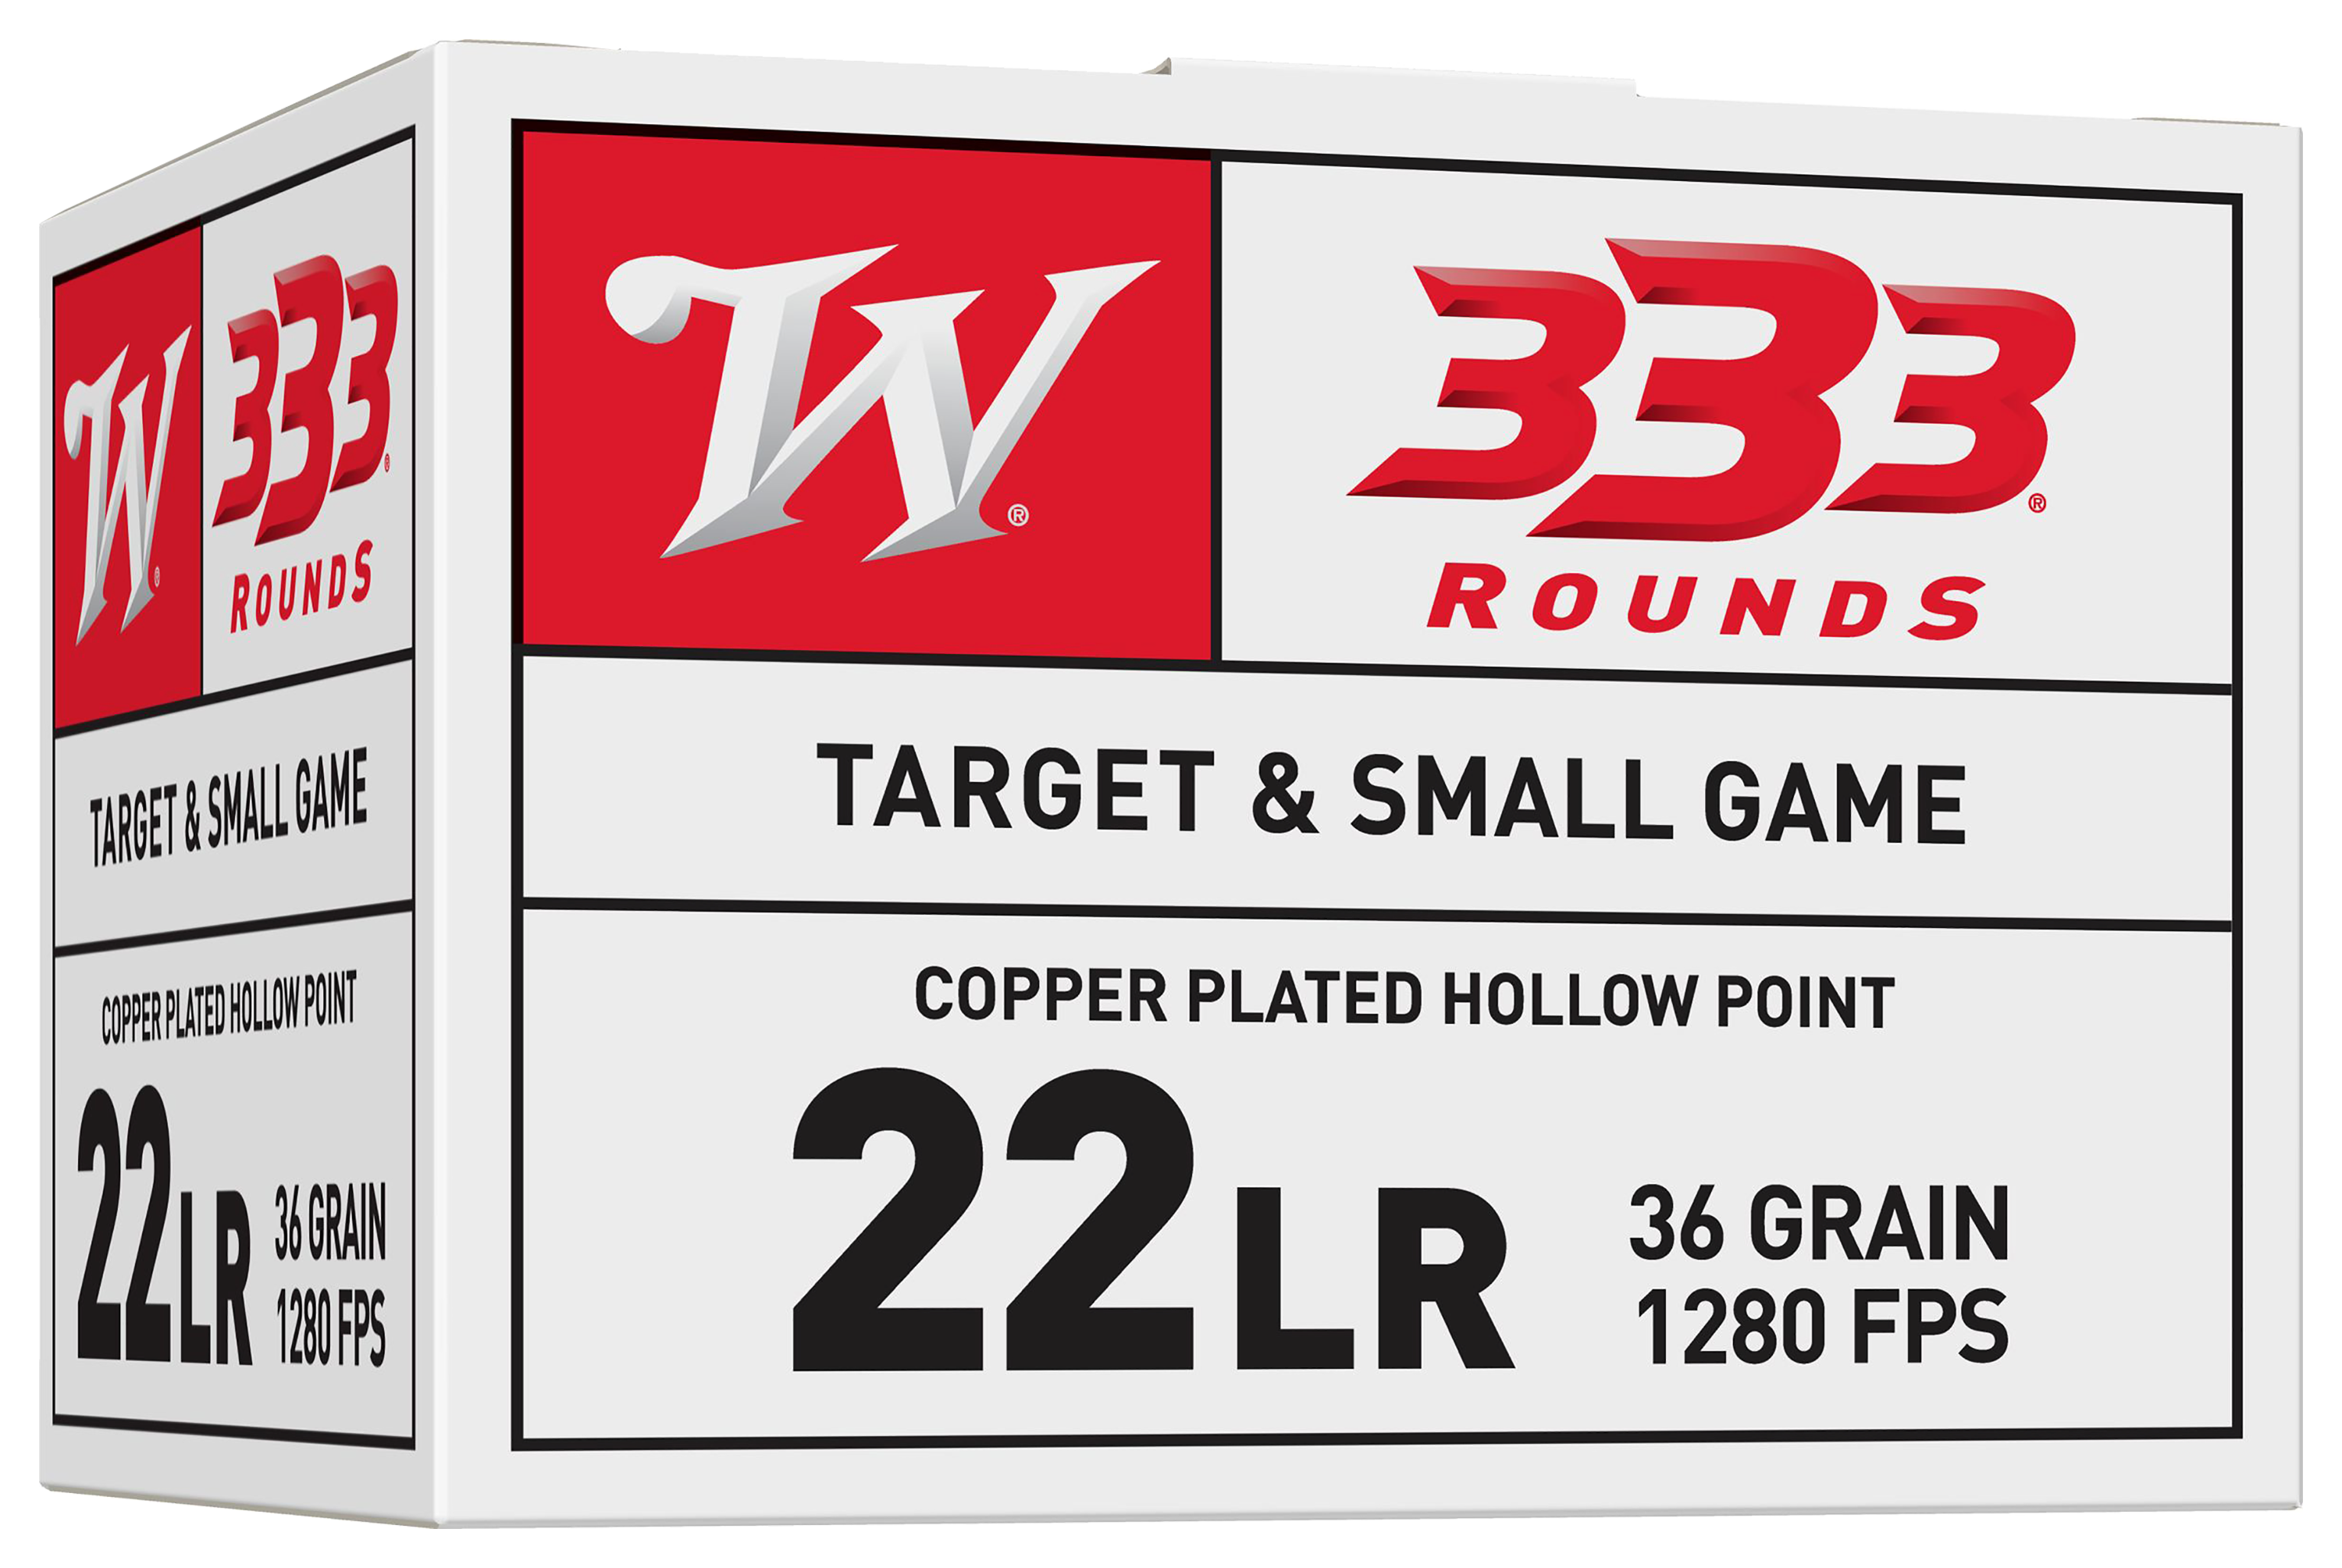 Winchester Bulk Pack Rimfire Ammo - .22 Long Rifle - Plated Hollow Point - 36 Grain - 333 Rounds